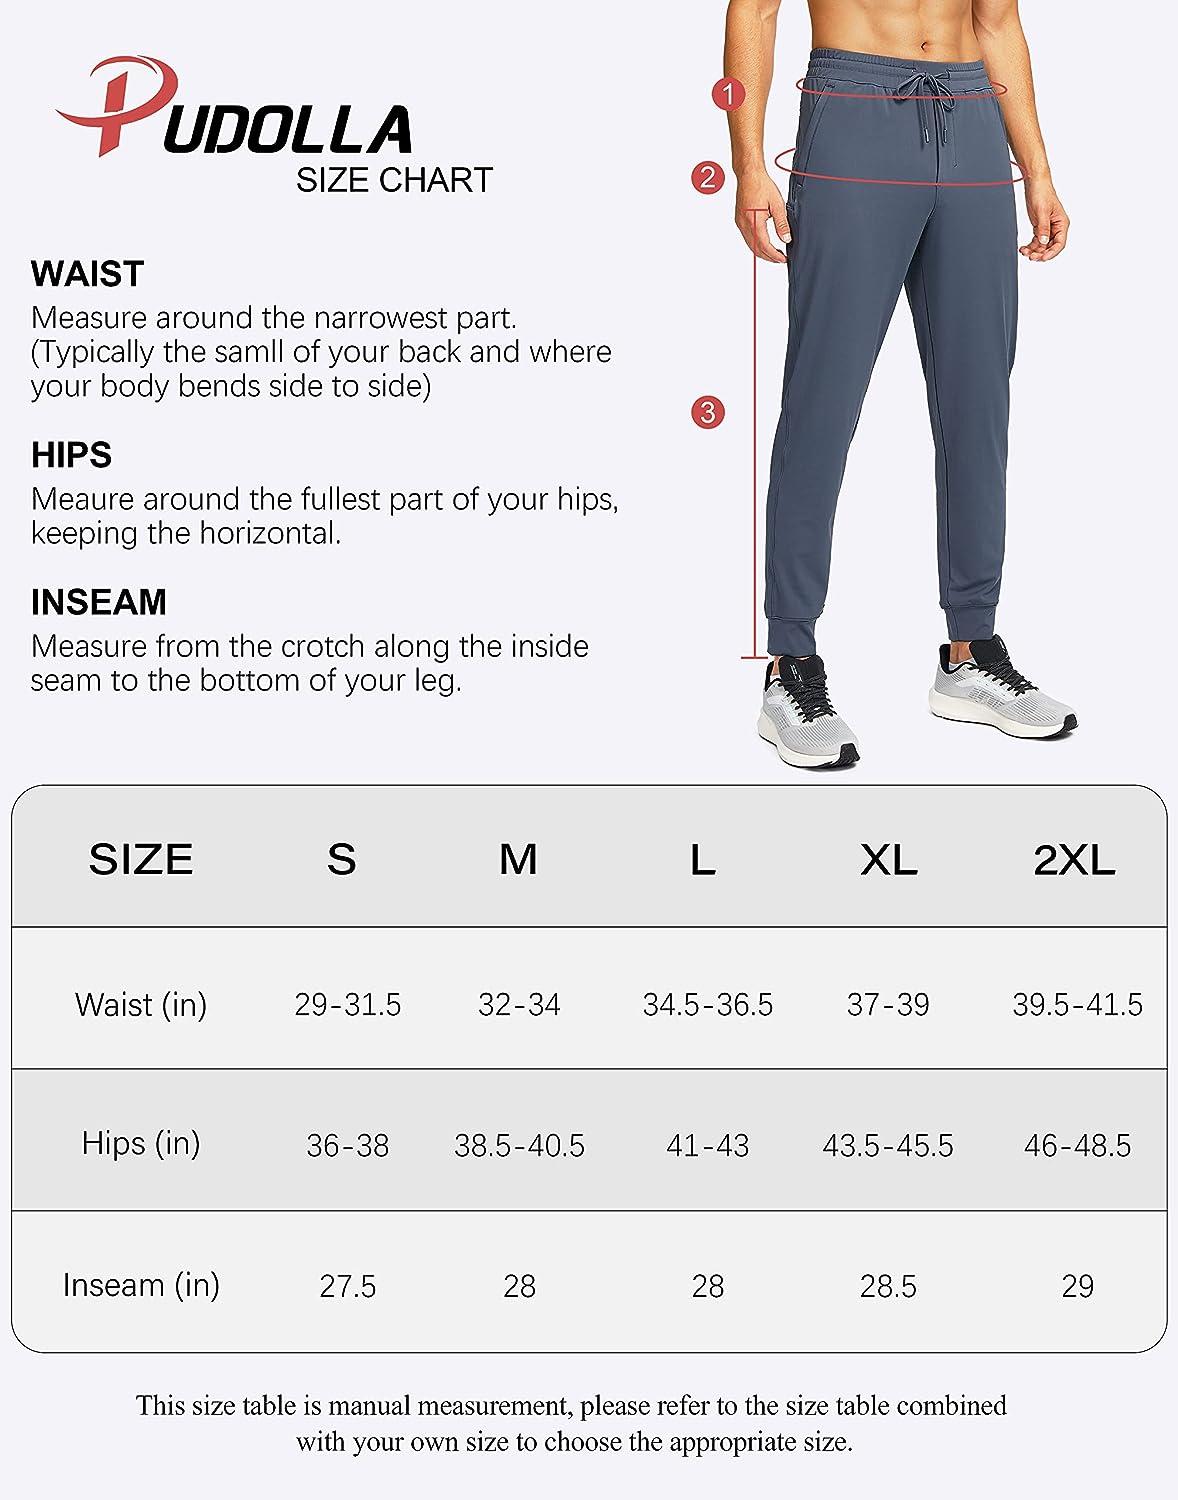 mens joggers zipper casual pants with